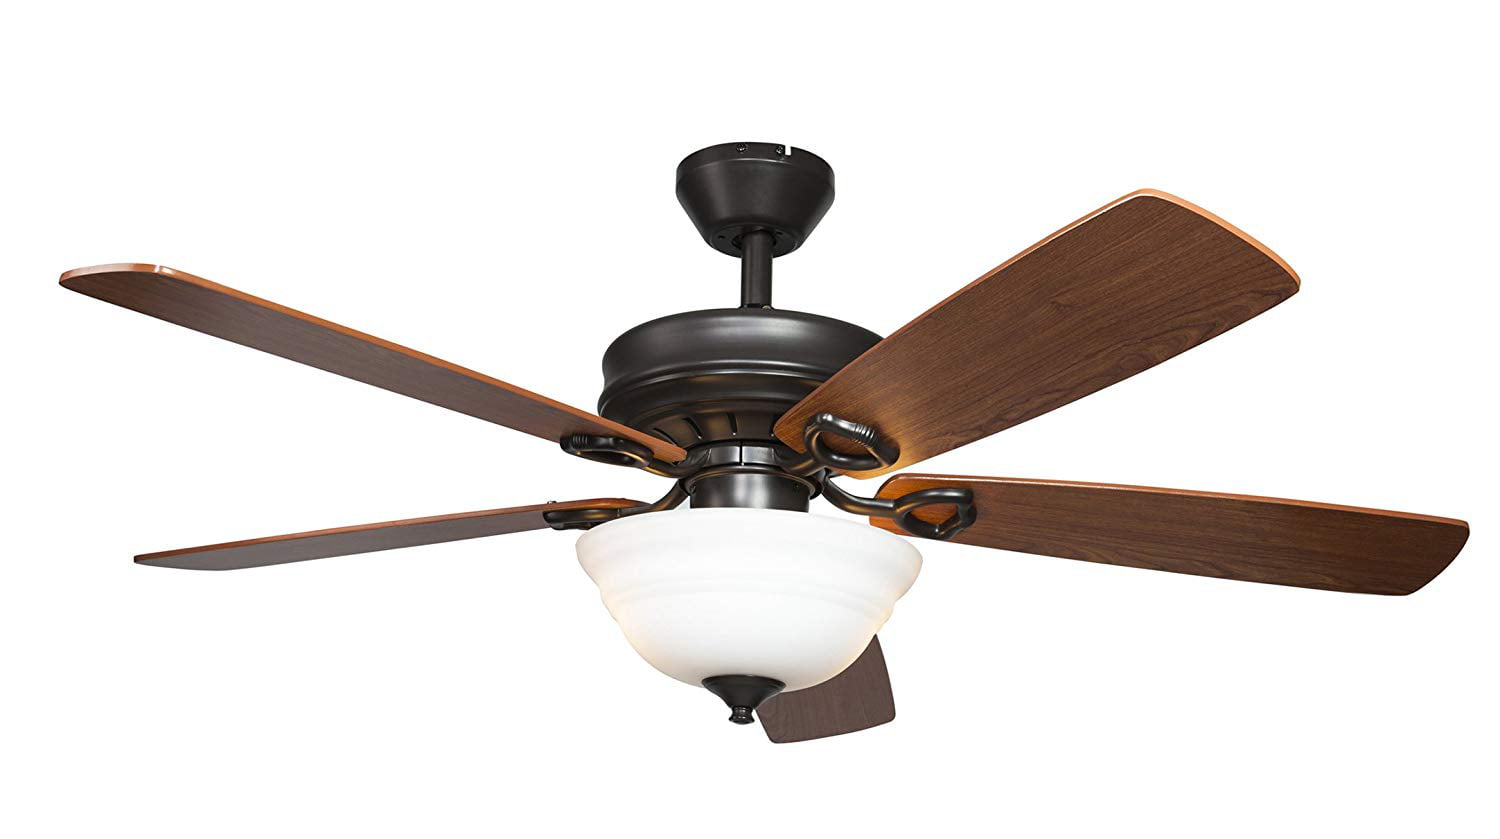 Bulb Not Included  Five Reversible Blades and Frosted Dome Light Hyperikon Ceiling Fan with Remote Control 52-inch Indoor Black Ceiling Fan